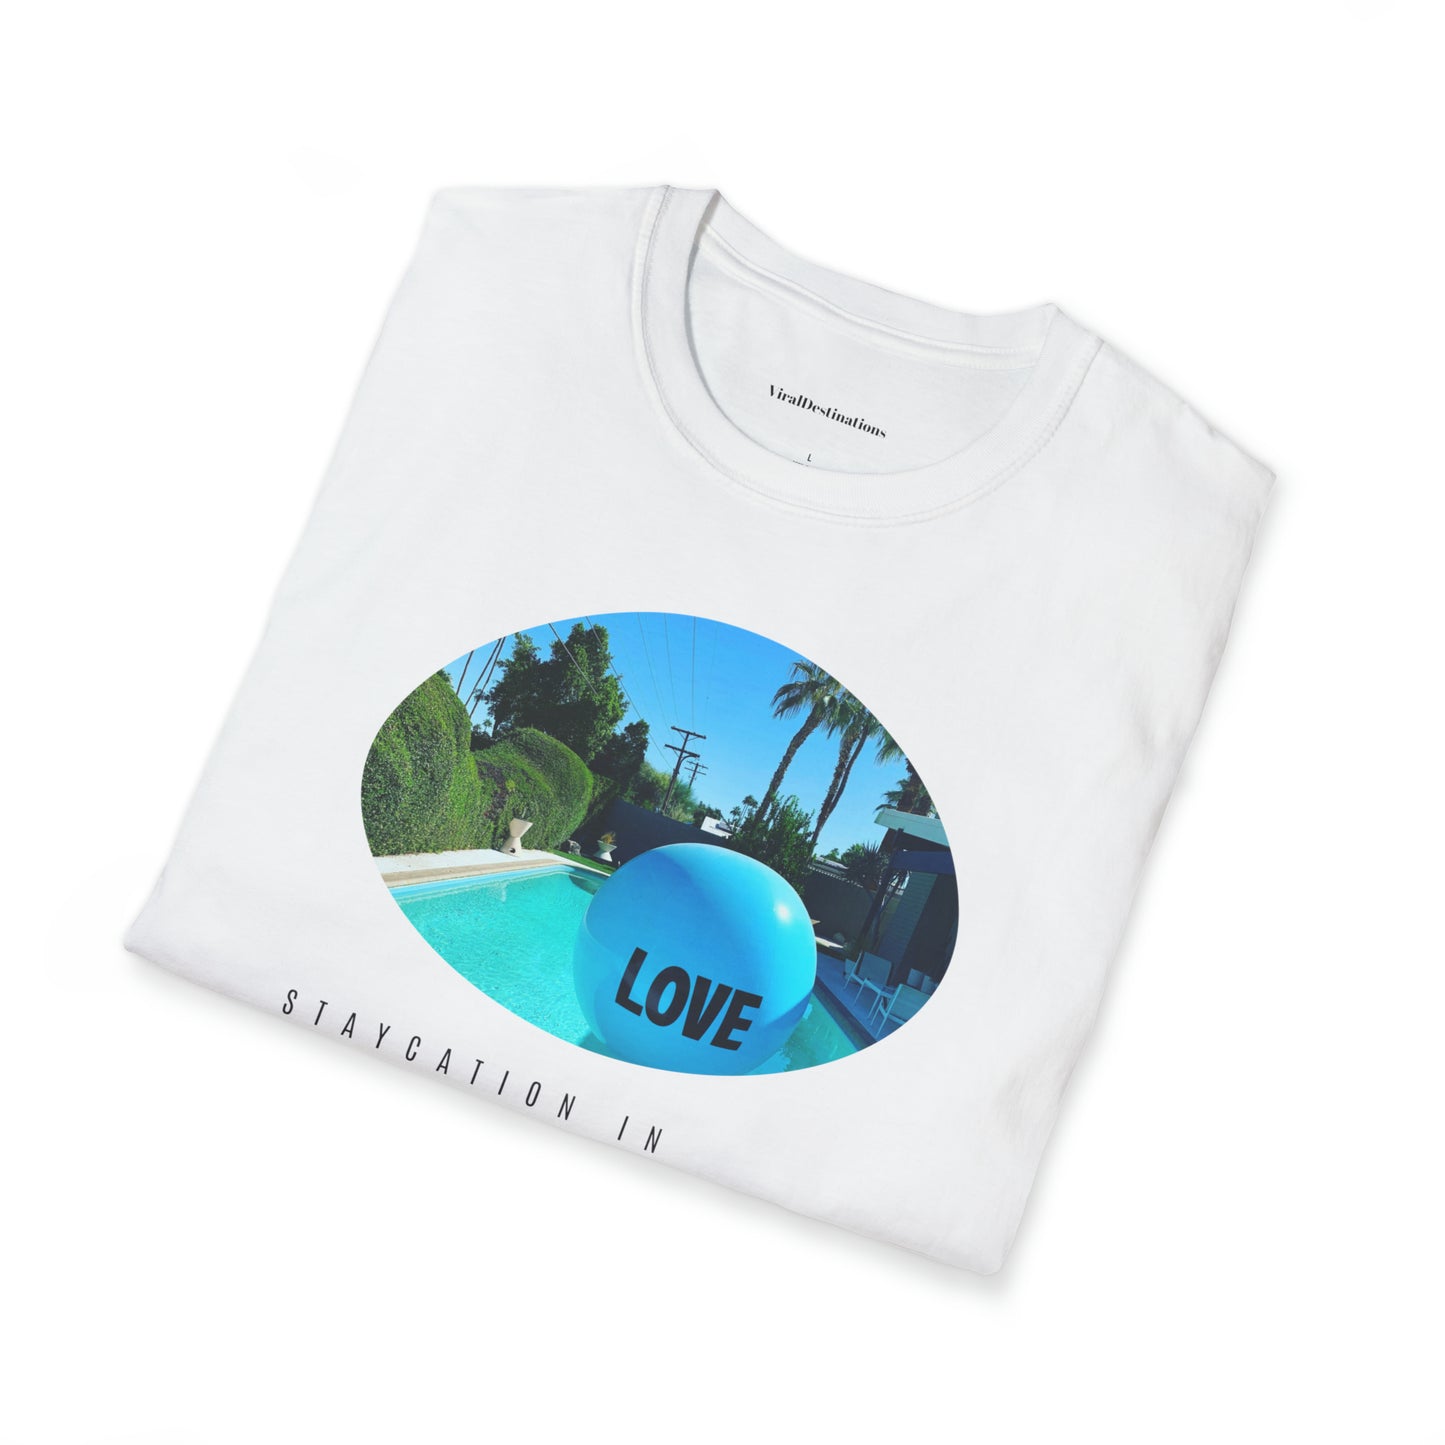 Palm Springs Staycation Lifestyle Unisex Soft T-Shirt by ViralDestinations